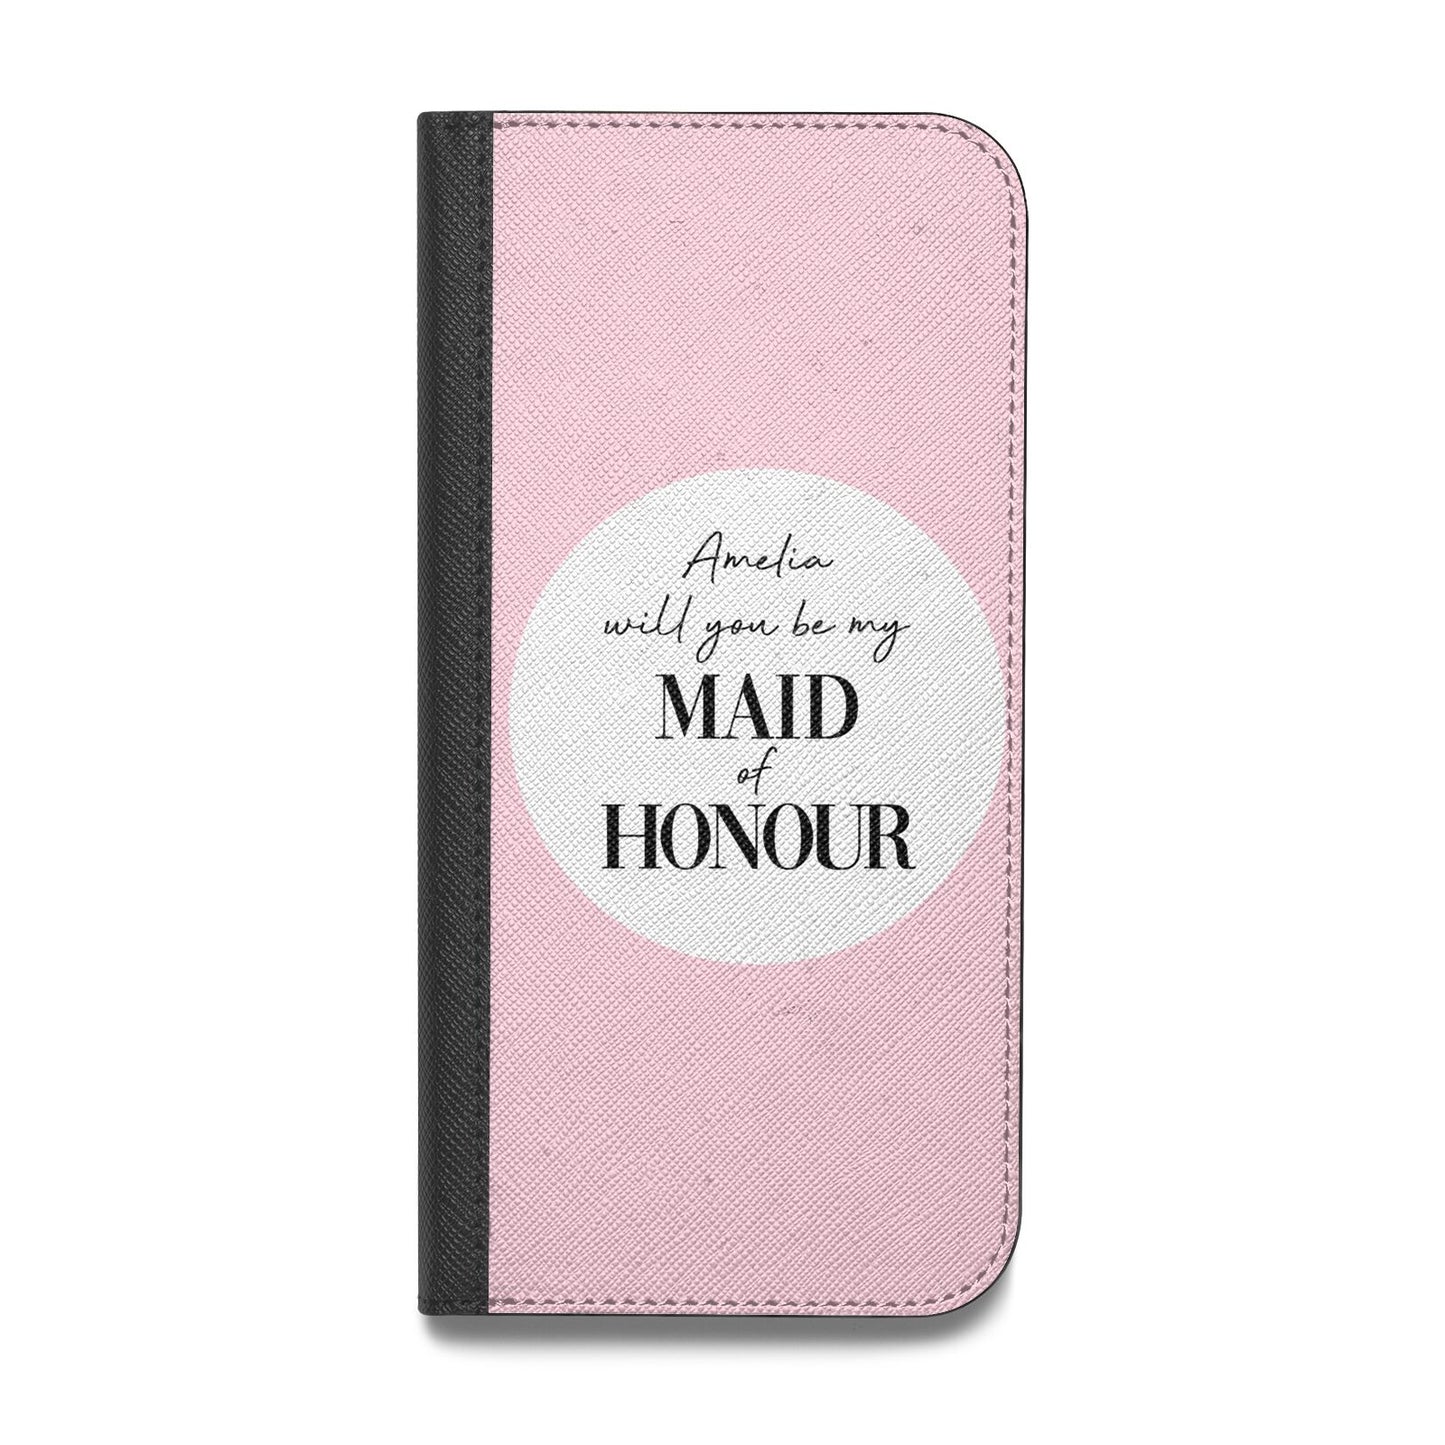 Will You Be My Maid Of Honour Vegan Leather Flip iPhone Case